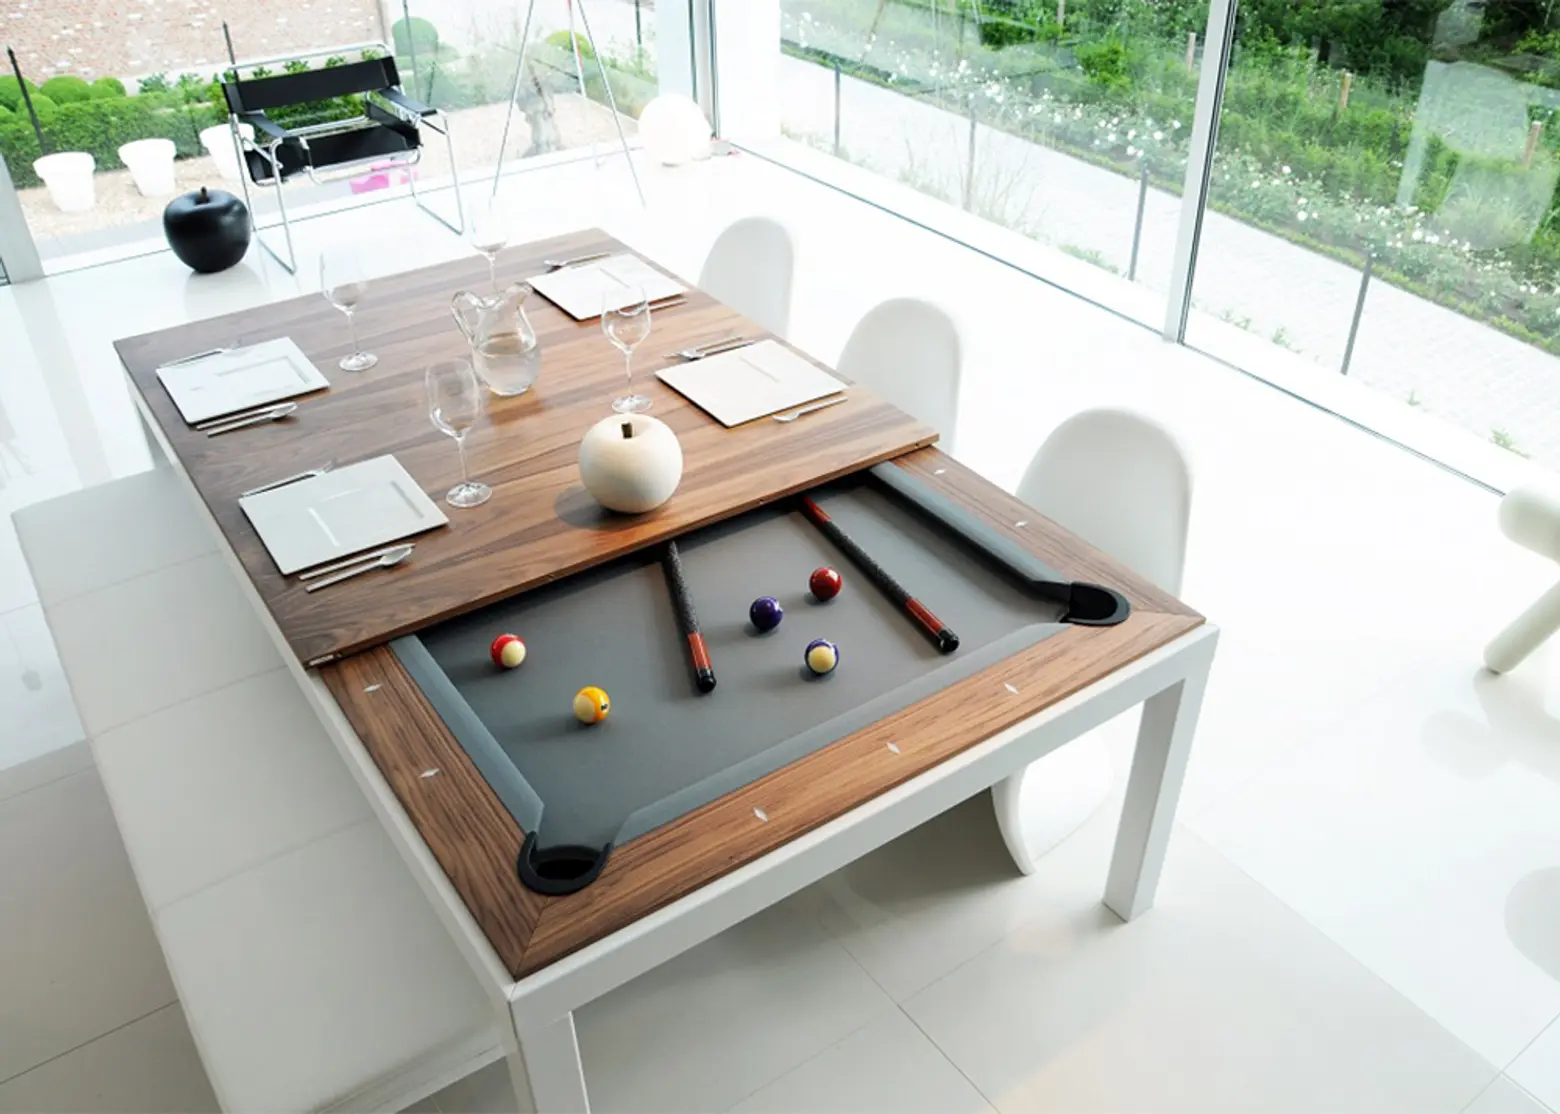 Amarith Fuses a Dining Table and a Pool Table in a Classy Way